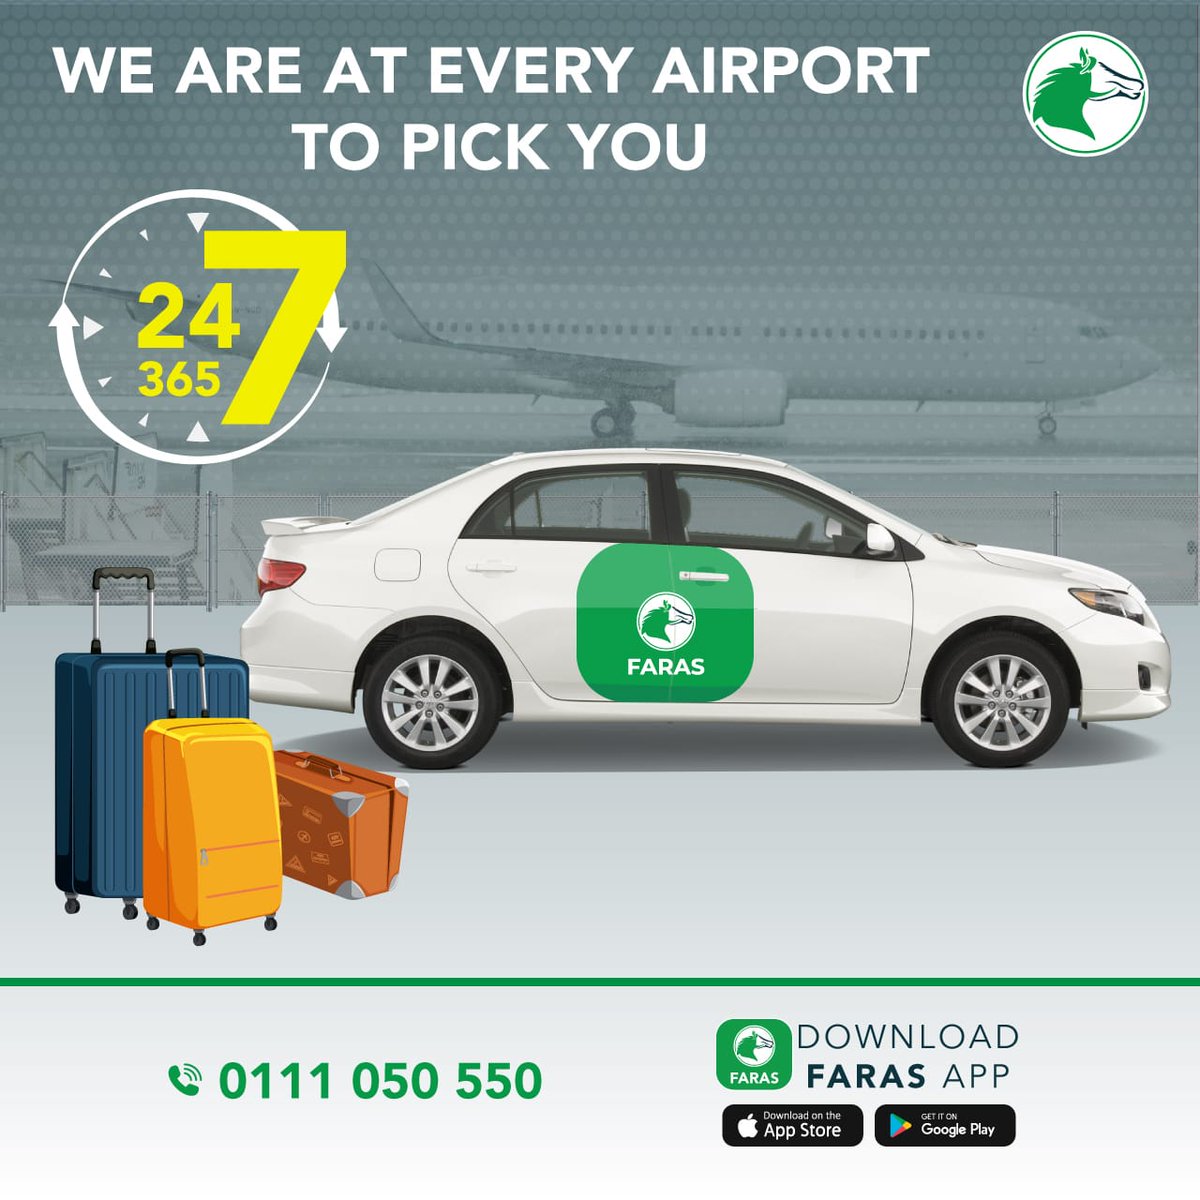 Whether you are traveling to the airport or coming from the airport, Faras cabs are always available to take you to any place you intend to travel to. Chose Faras today! #EasterNaFaras @farasKenya